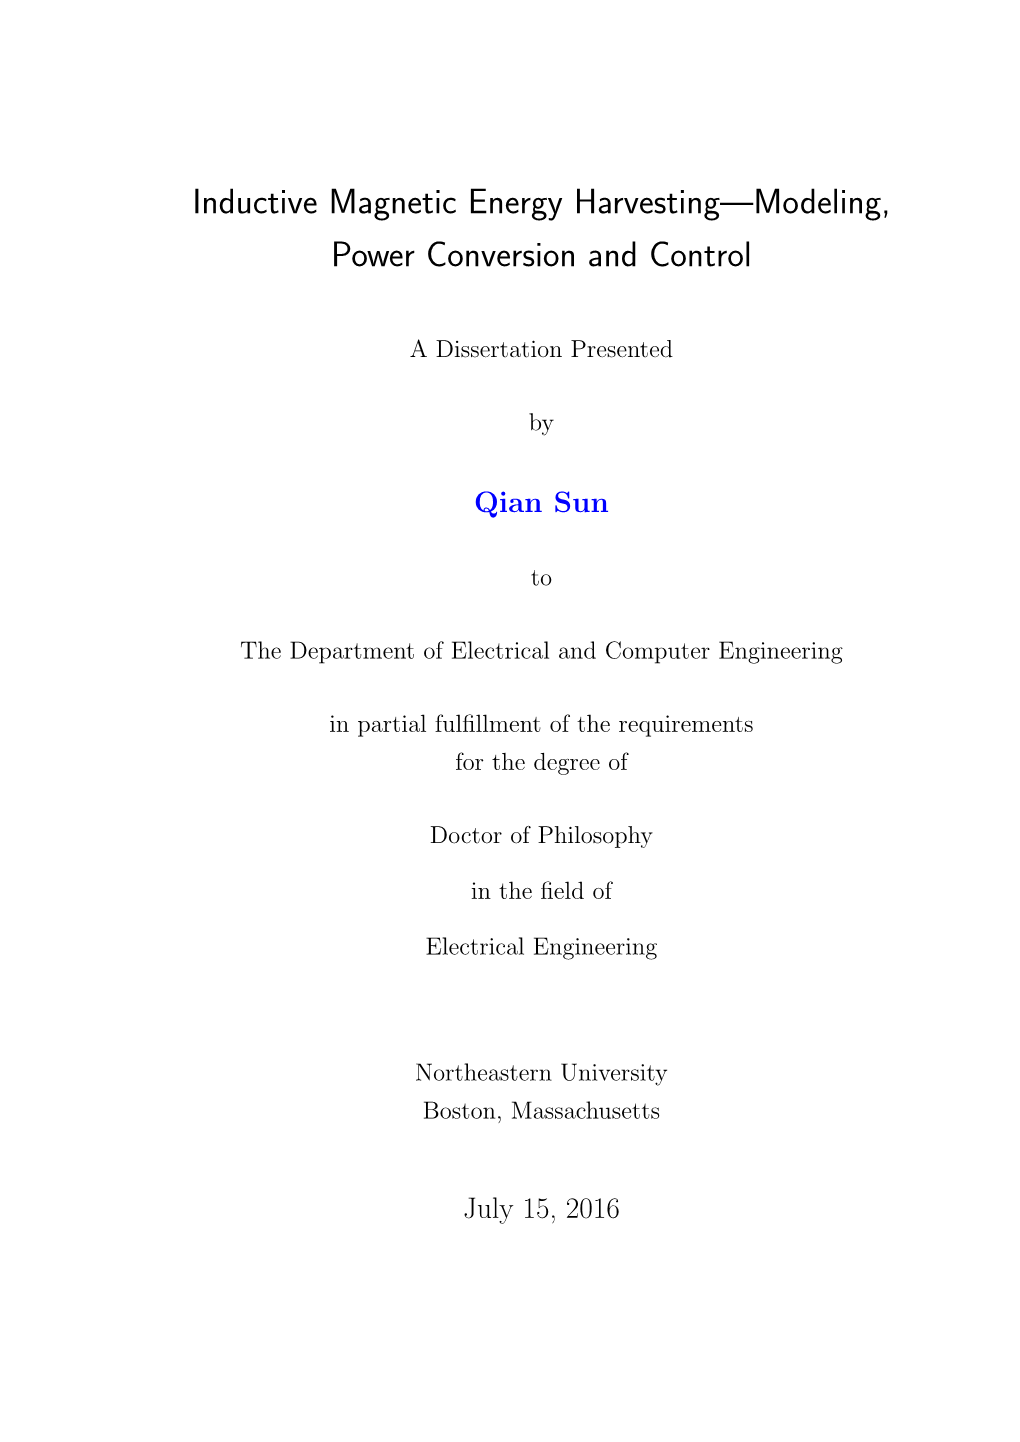 Inductive Magnetic Energy Harvesting—Modeling, Power Conversion and Control